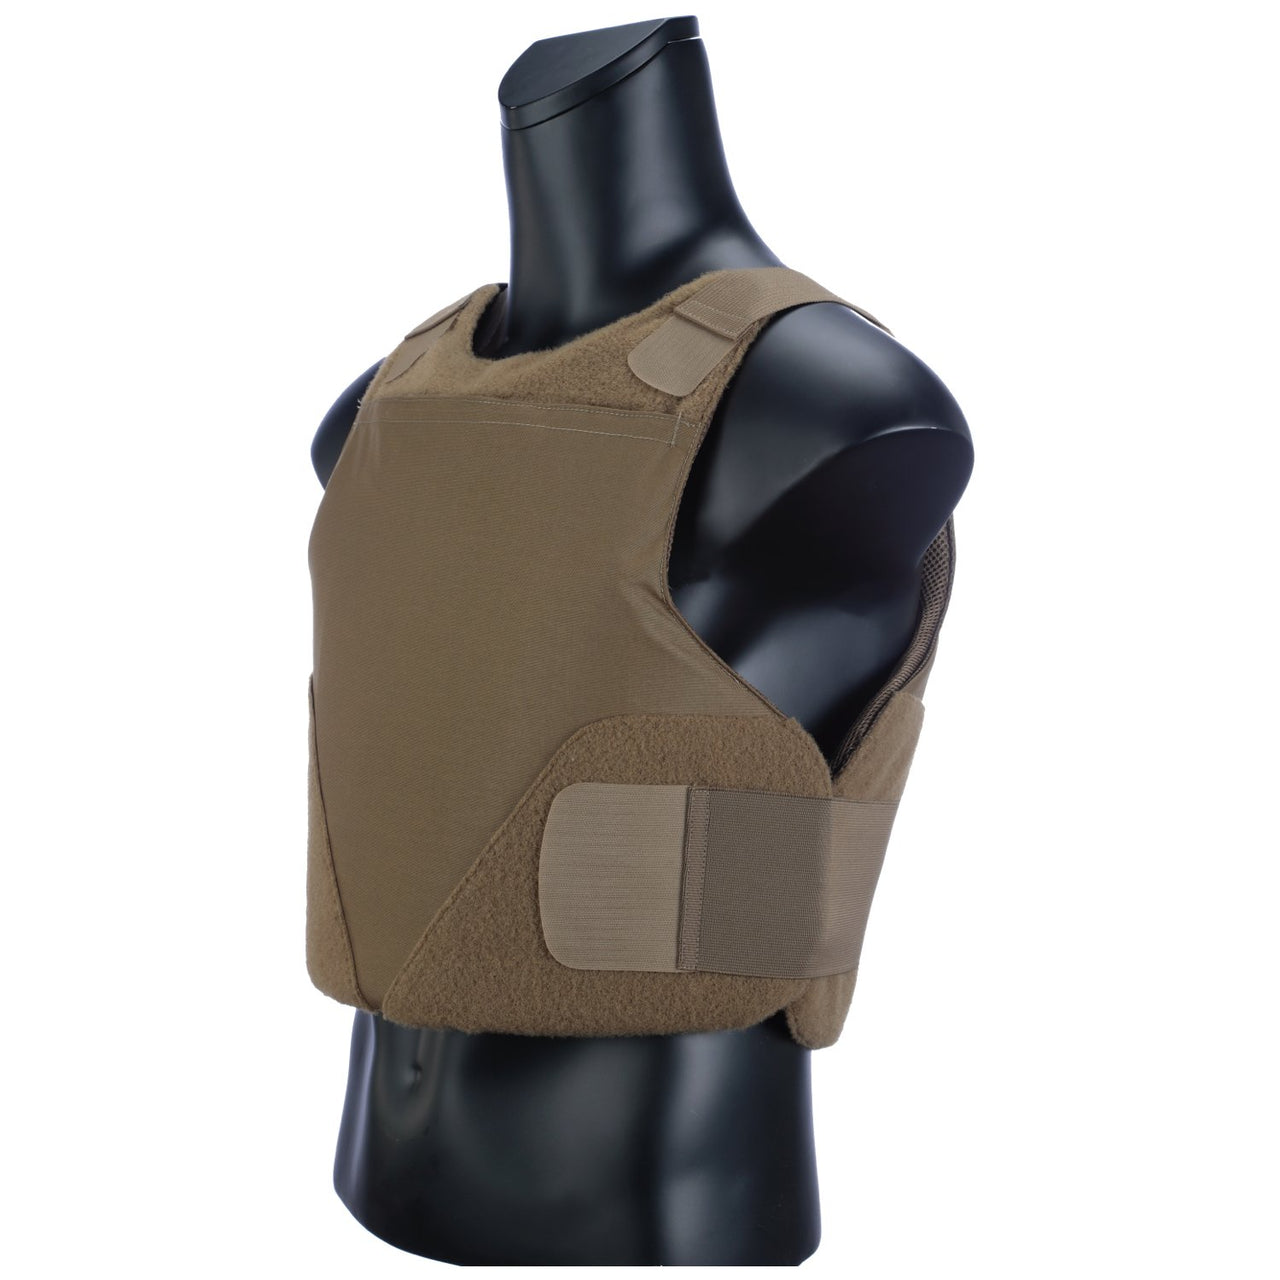 A Body Armor Direct All American Concealable Enhanced Multi-Threat Vest with a tan vest.